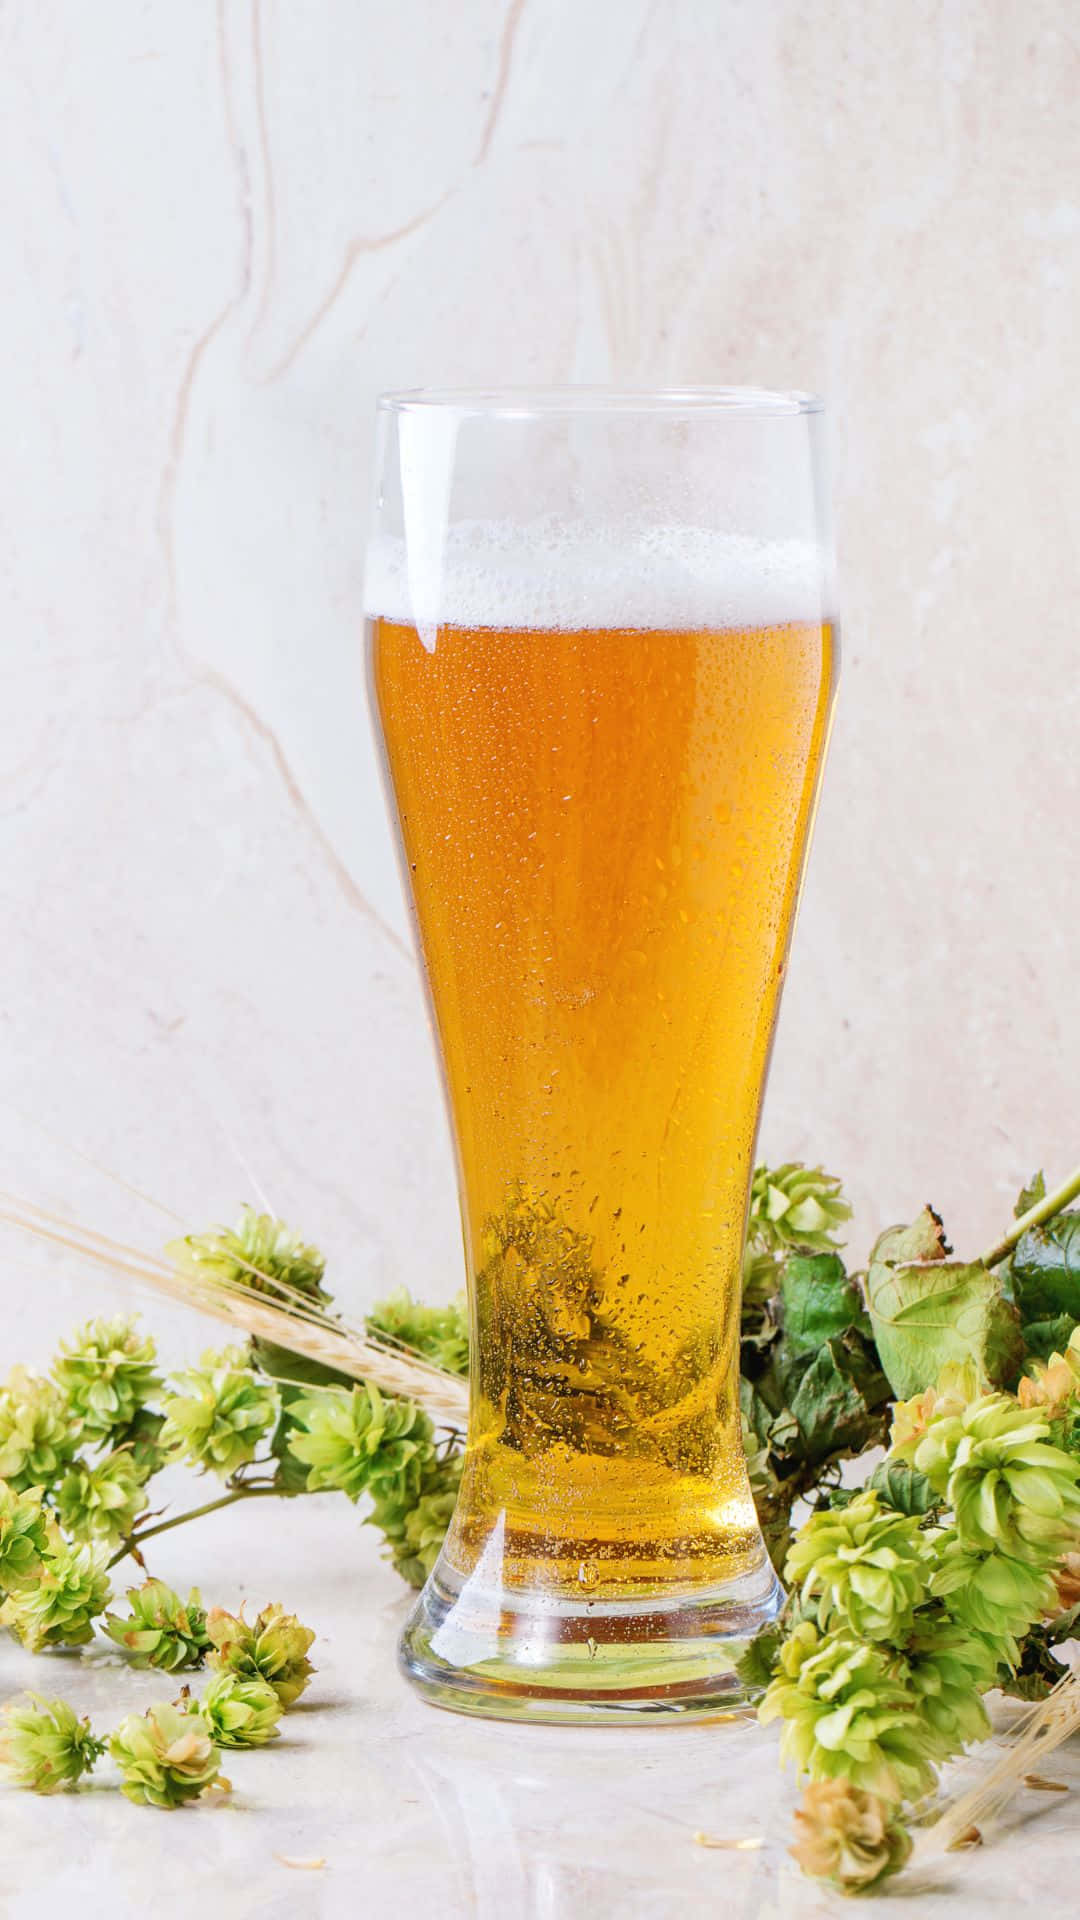 A Glass Of Beer With Hops And Flowers